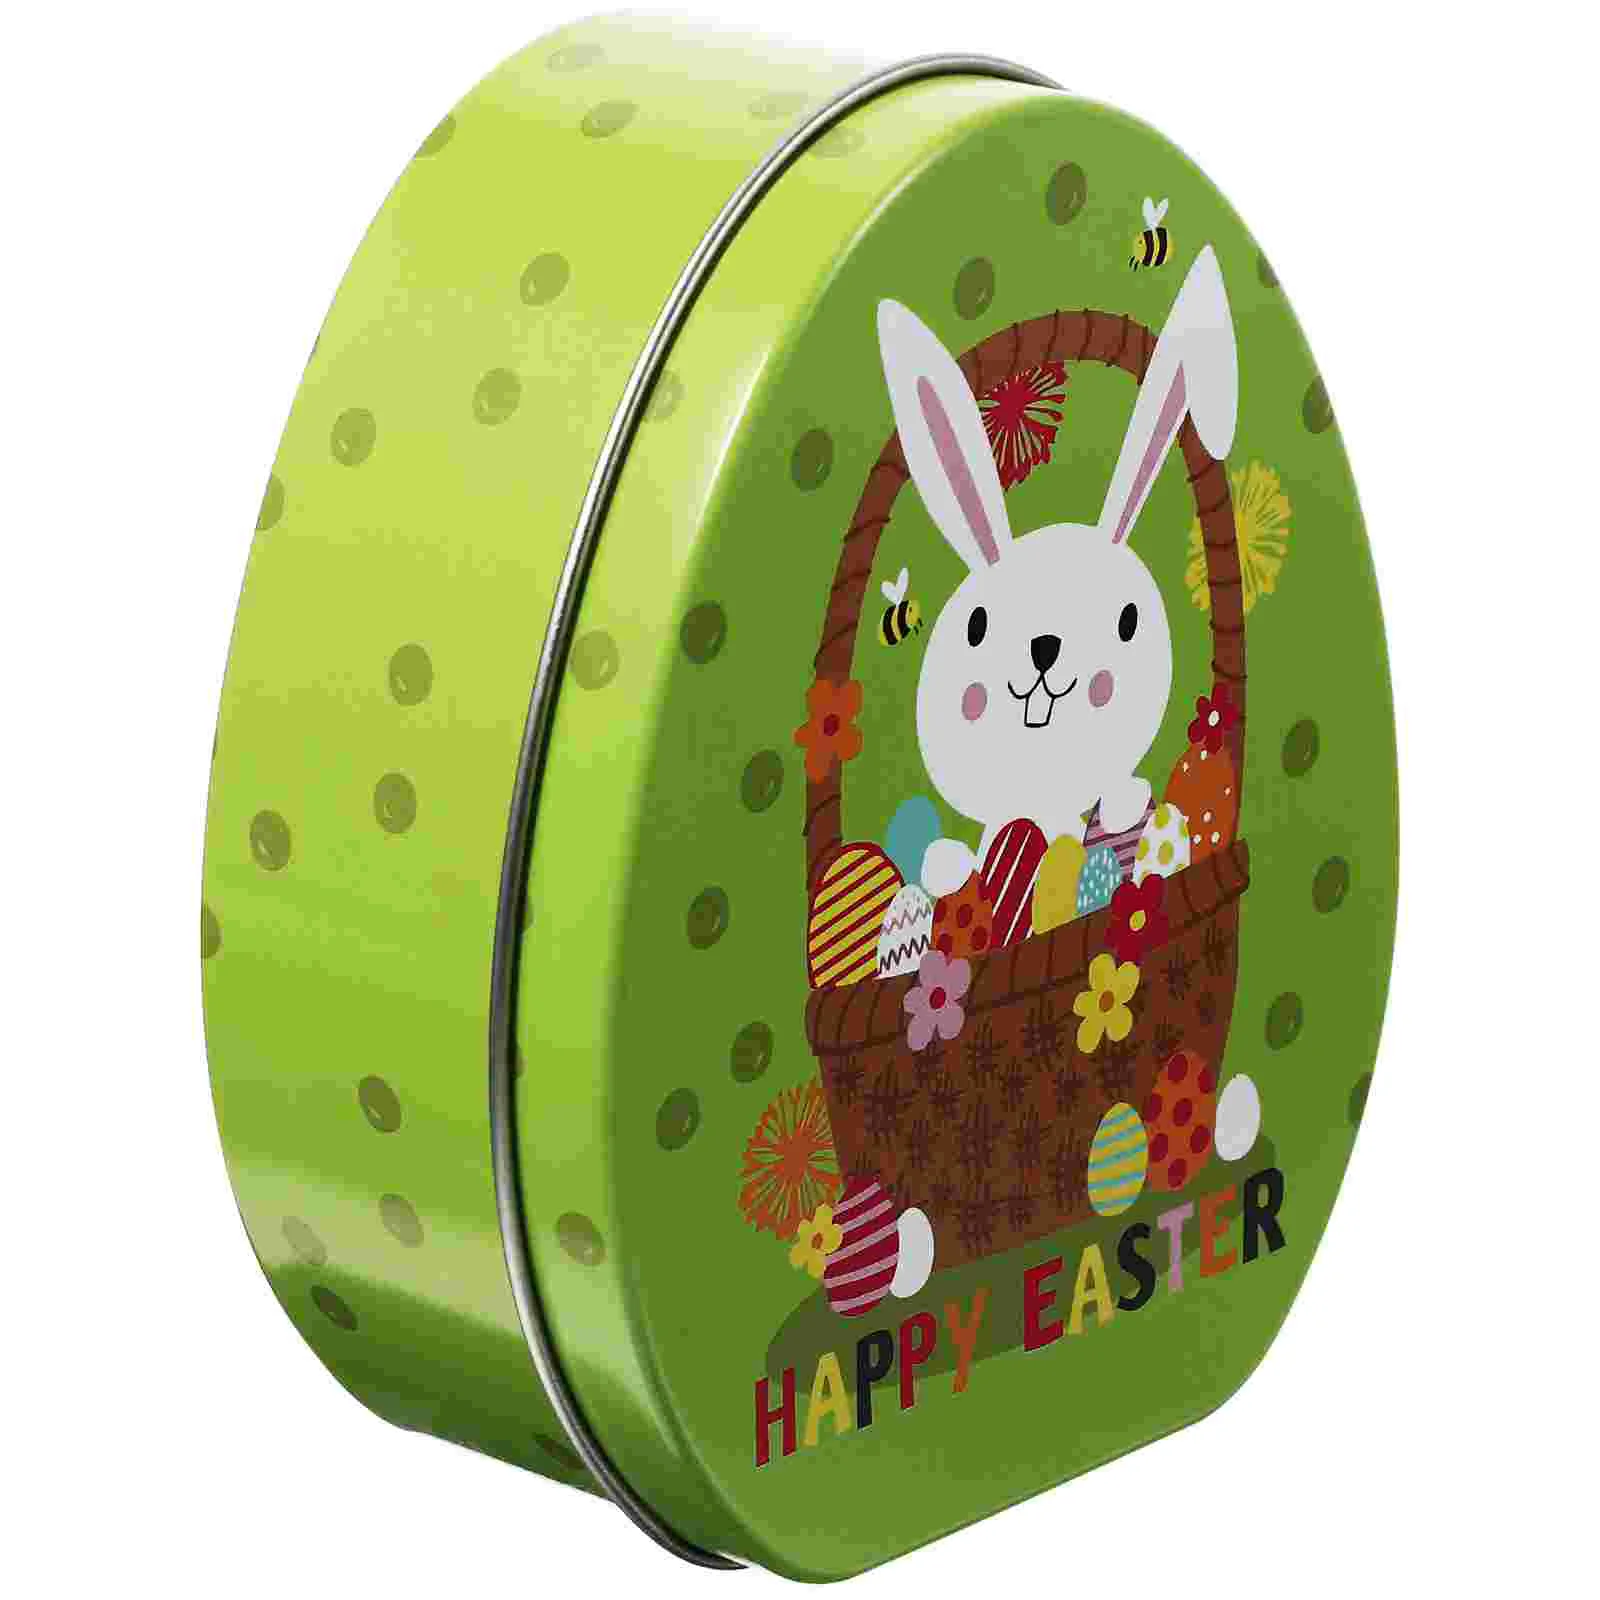 

Easter Box Tin Candy Boxes Gift Storage Tins Cookie Tinplate Lids Eggs Metal Bunny Large Treat Case Empty Jar Decor Mini